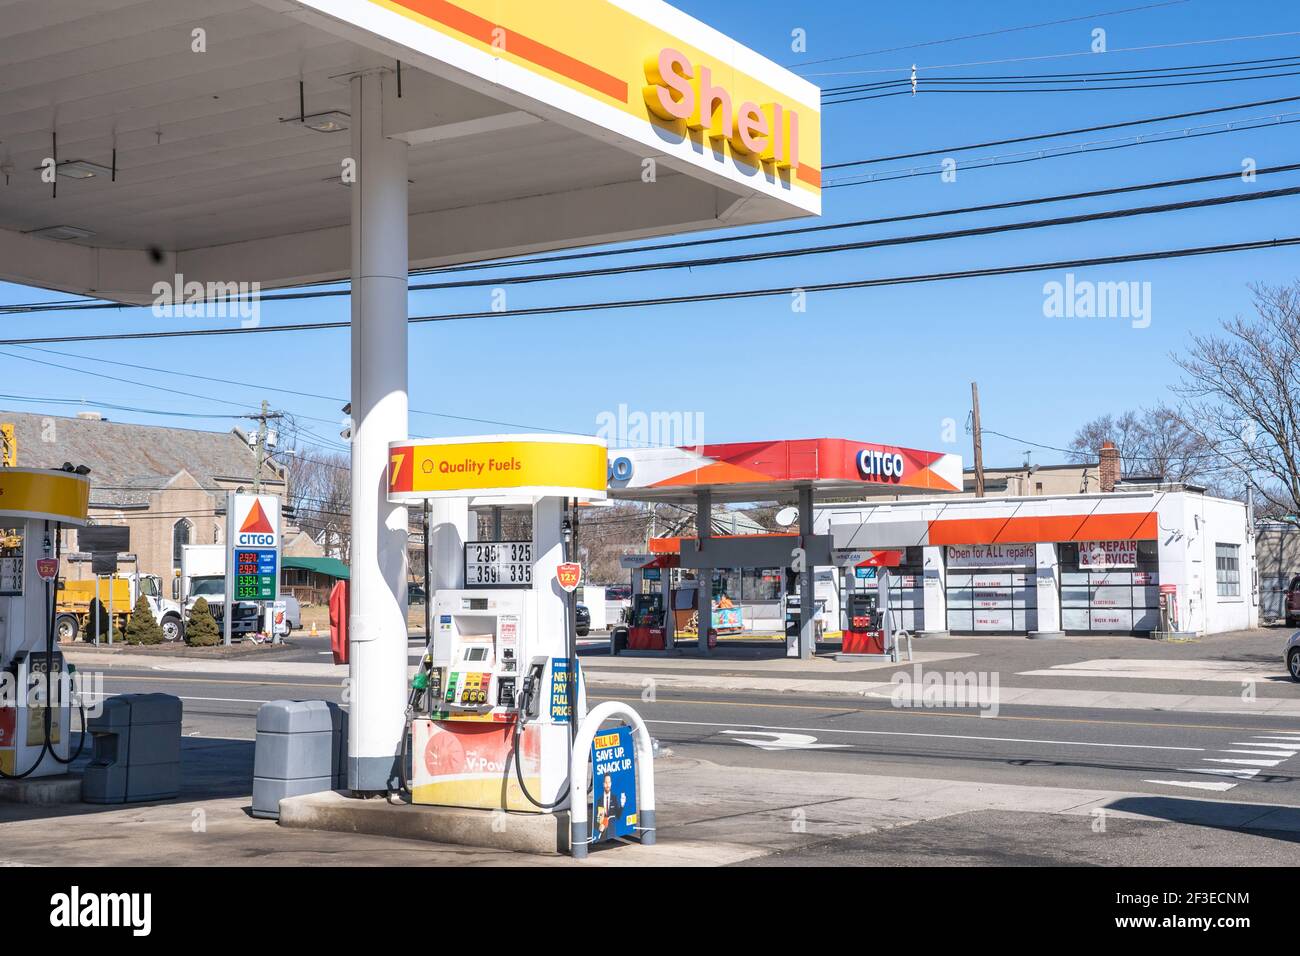 A view of Shell and Citgo gas stations in Norwalk, Connecticut.Oil and gasoline prices were rebounding after last year's collapse in fuel demand and prices. According to the AAA motor club gas prices have risen about 35 cents a gallon on average over the last month and could reach $4 a gallon in some states by summer. Stock Photo